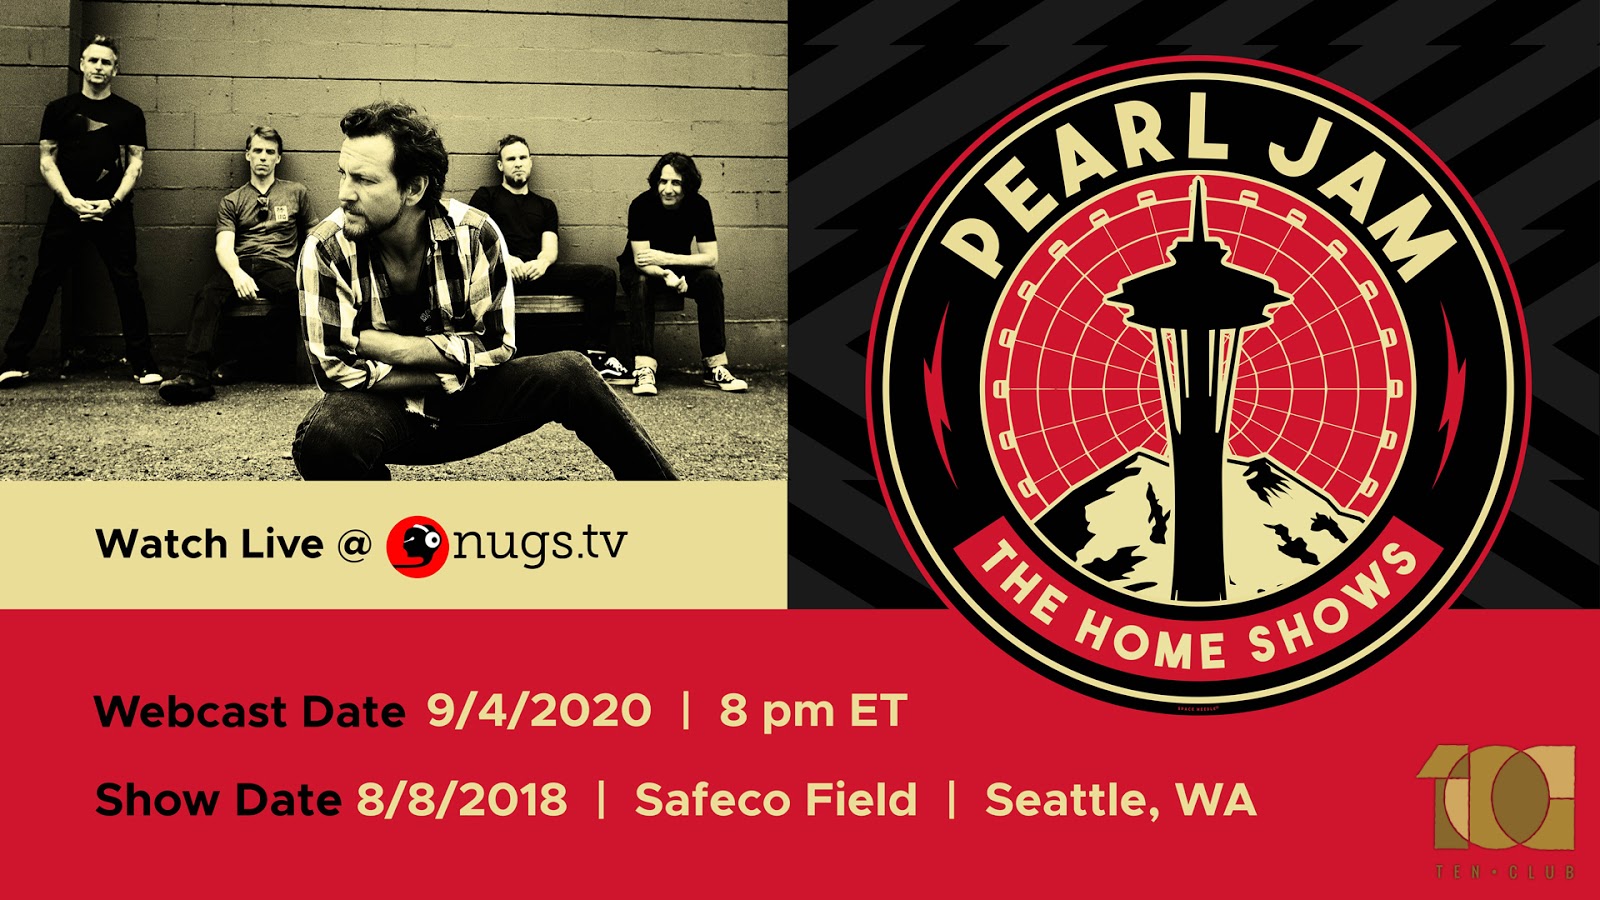 pearl jam_the home shows